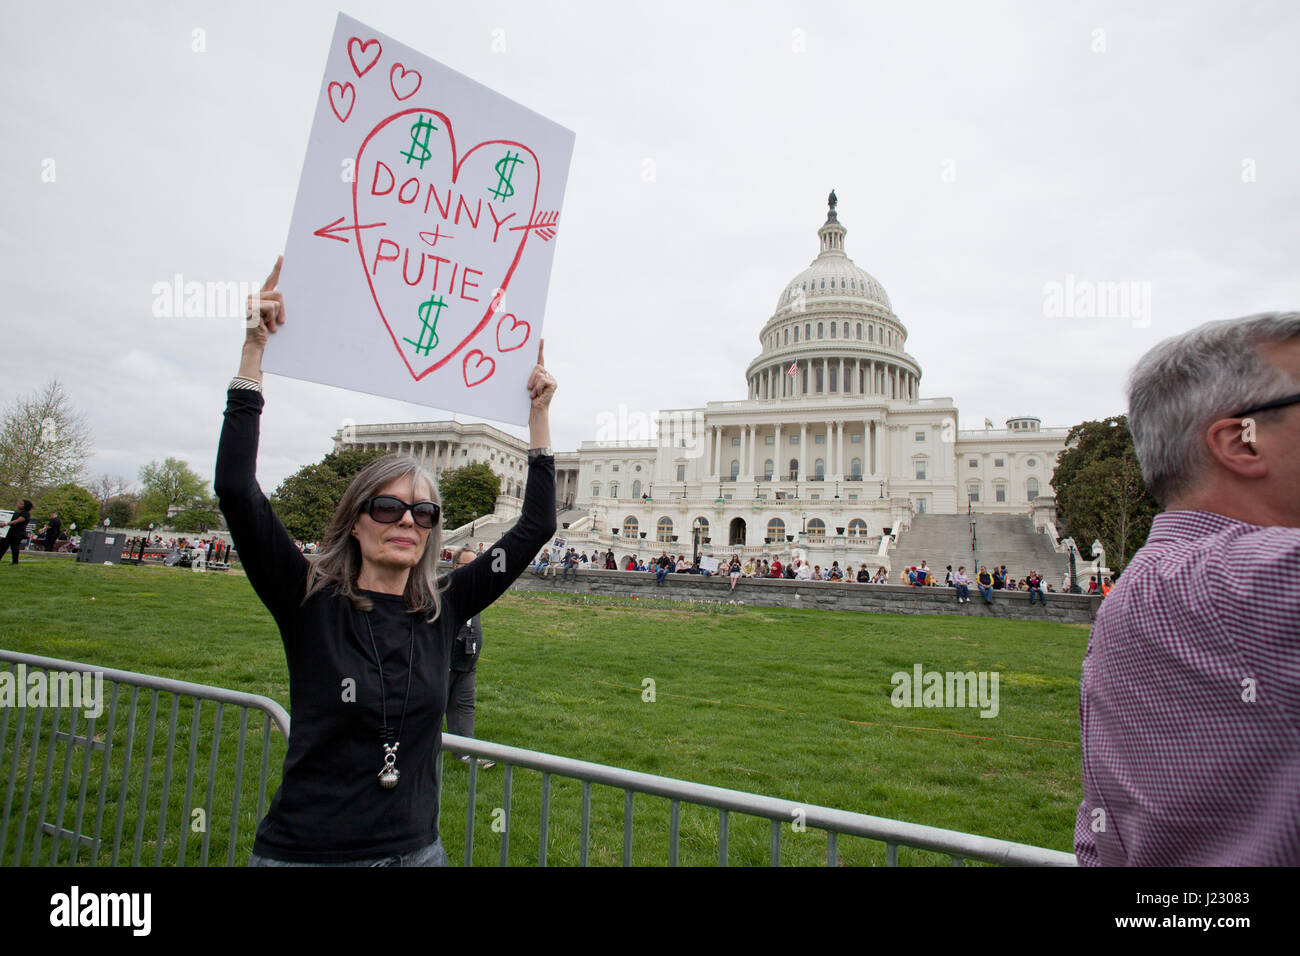 Anti-Trump protesters at the US Capitol building during TaxMarch - Washington, DC USA Stock Photo